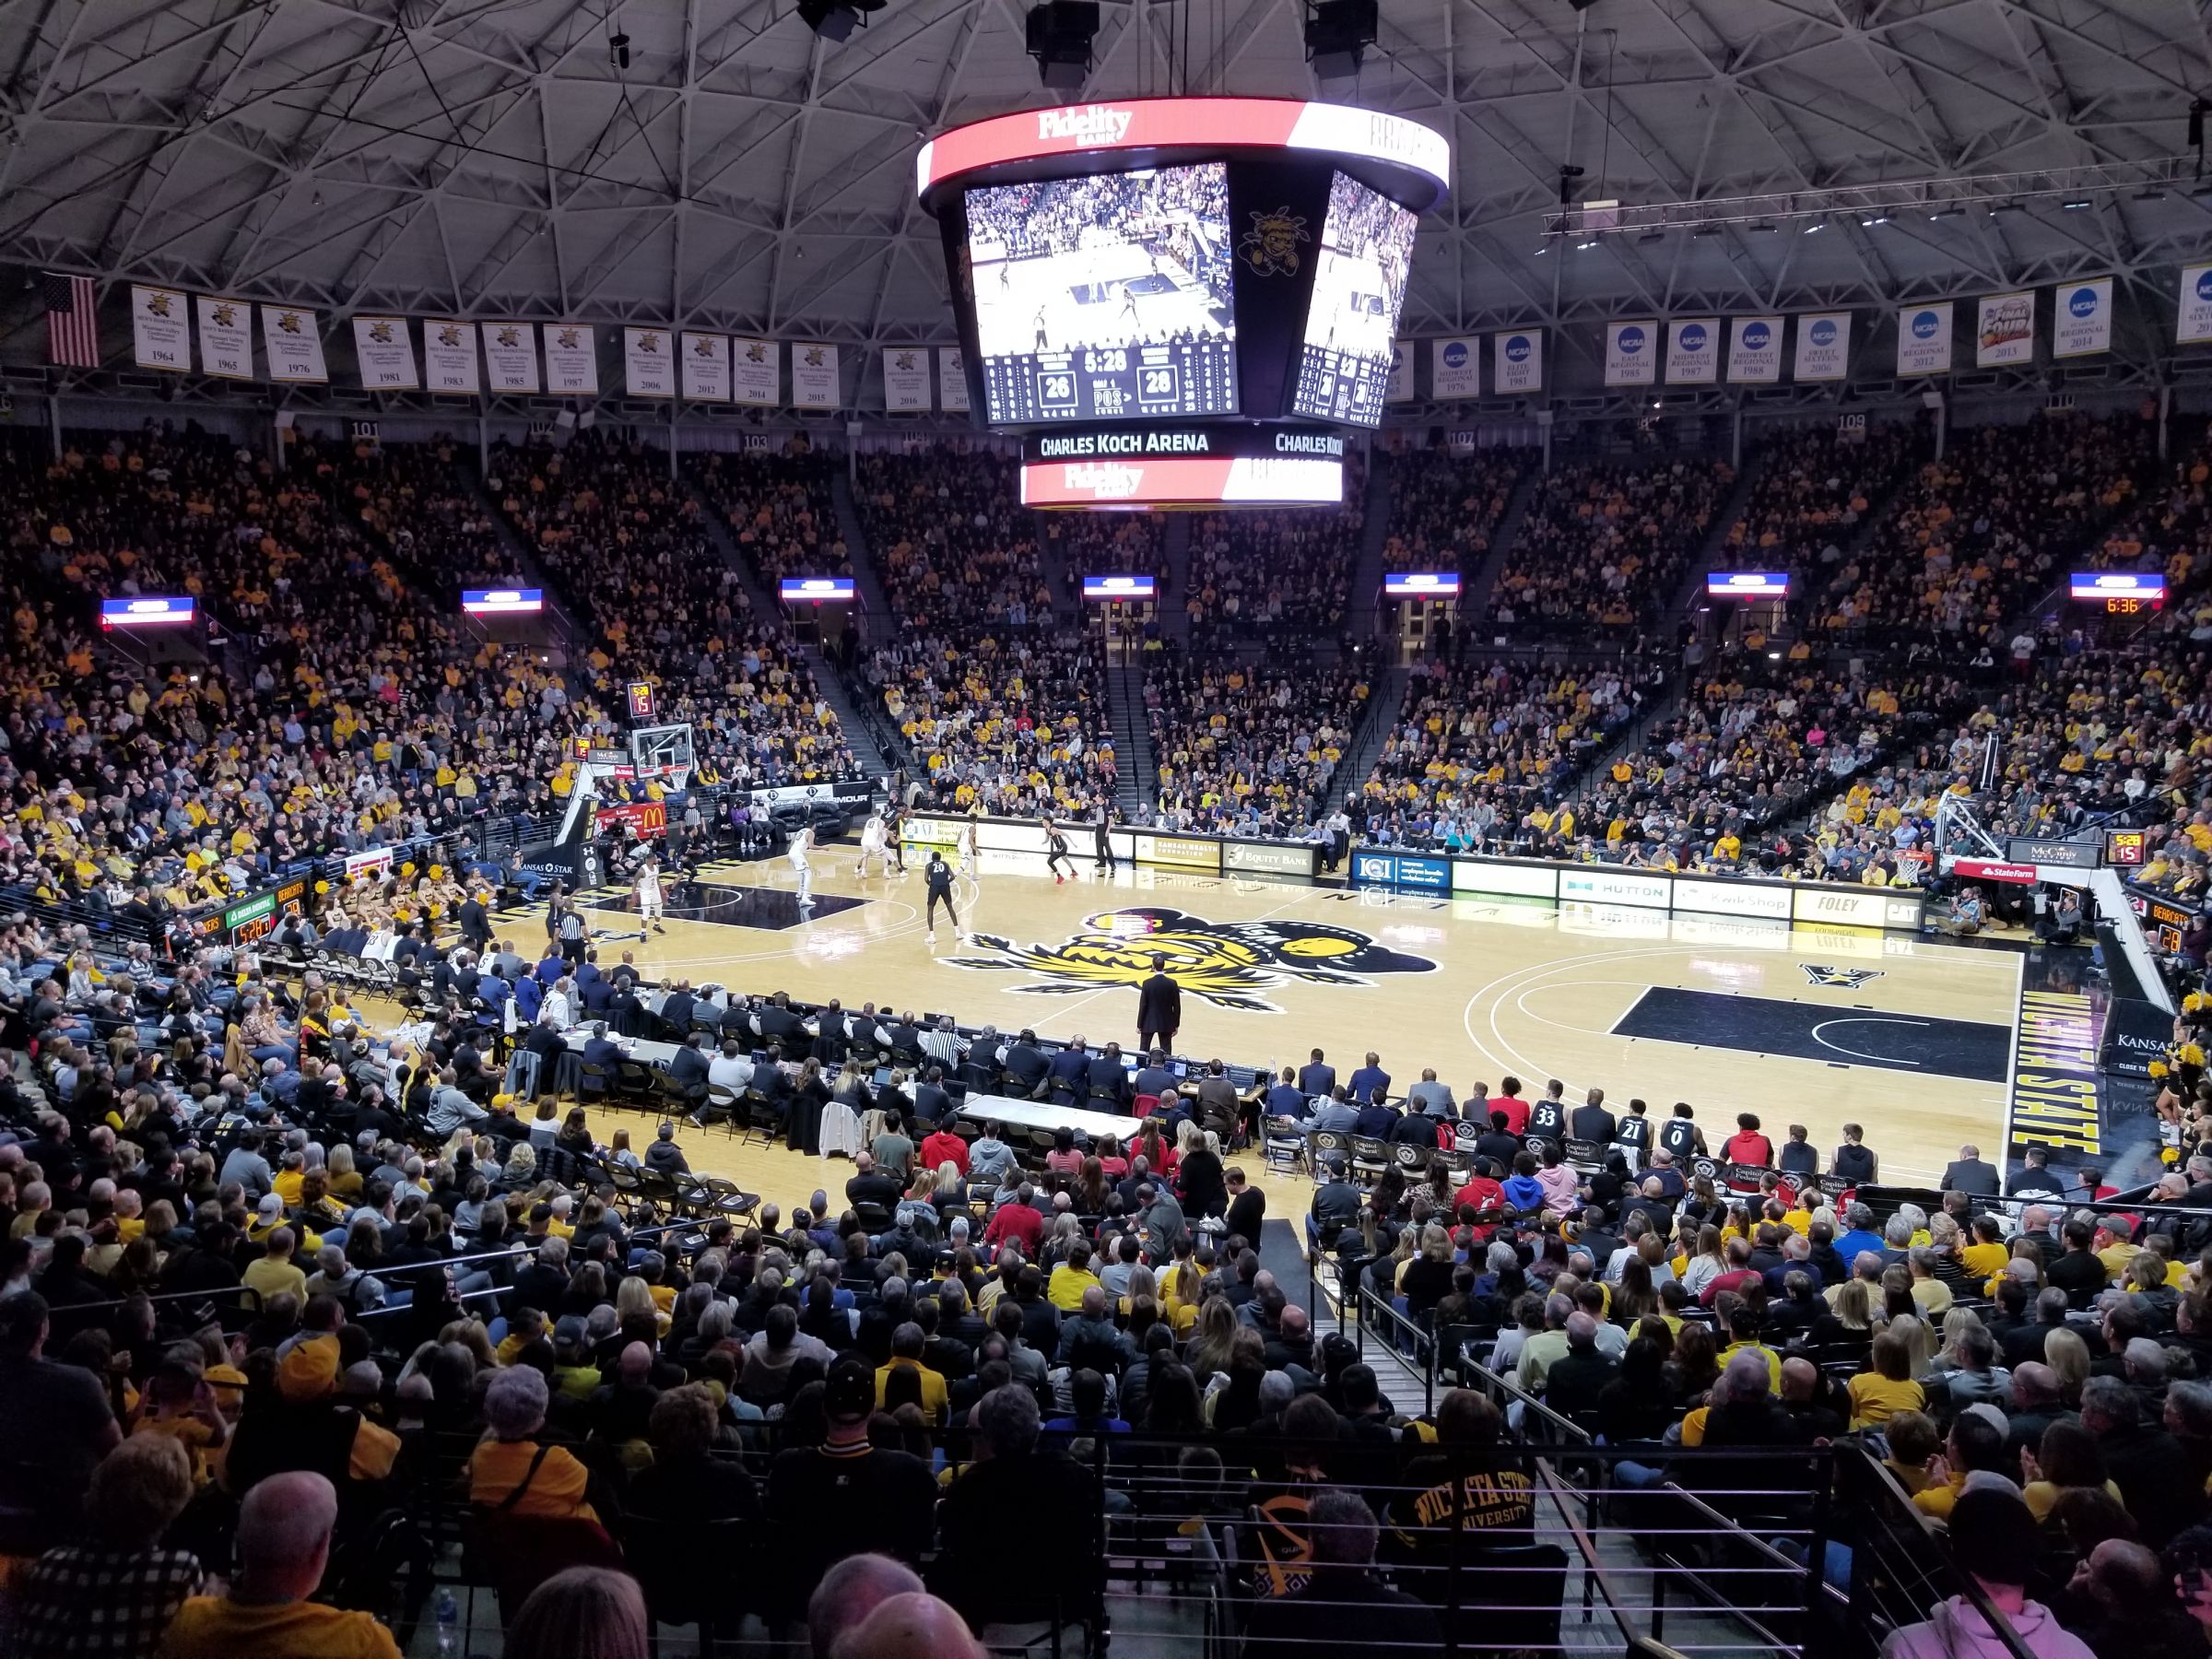 section 119, row 22 seat view  - charles koch arena